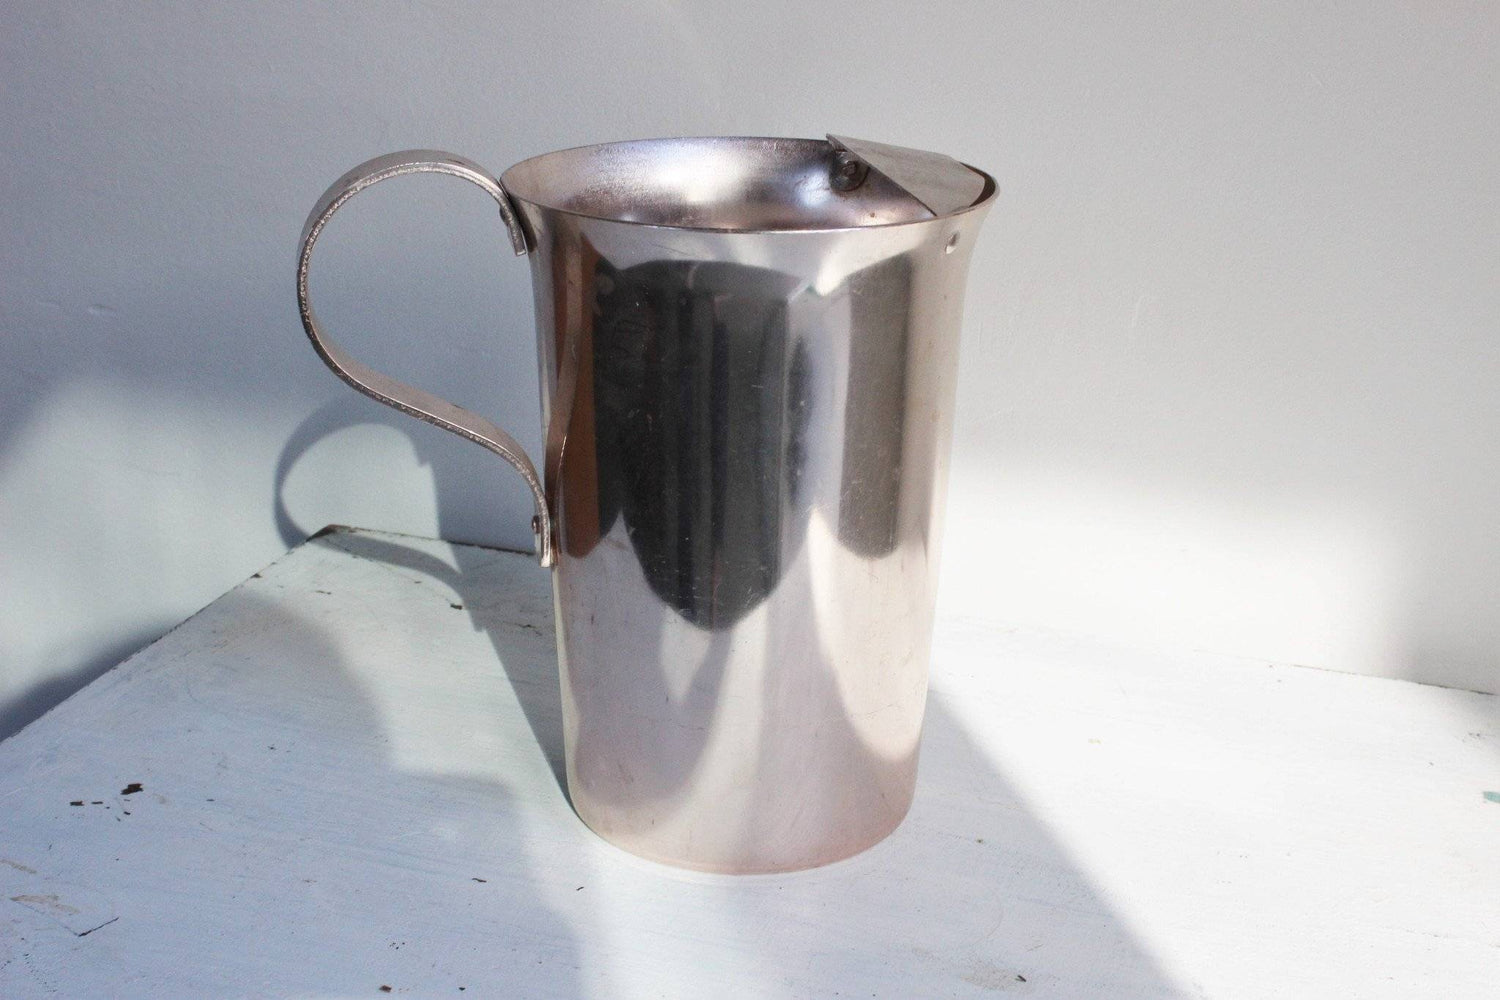 Vintage 1960s Metal Pitcher, Flamingo By Nasco Made In Italy-Mint Chips Vintage Home Goods-1960s Pitcher,Aluminum,Barware,Drinks,Flamingo By Nasco,Forgeed,Made In Italy,nasco,Silver Pitcher,Vintage